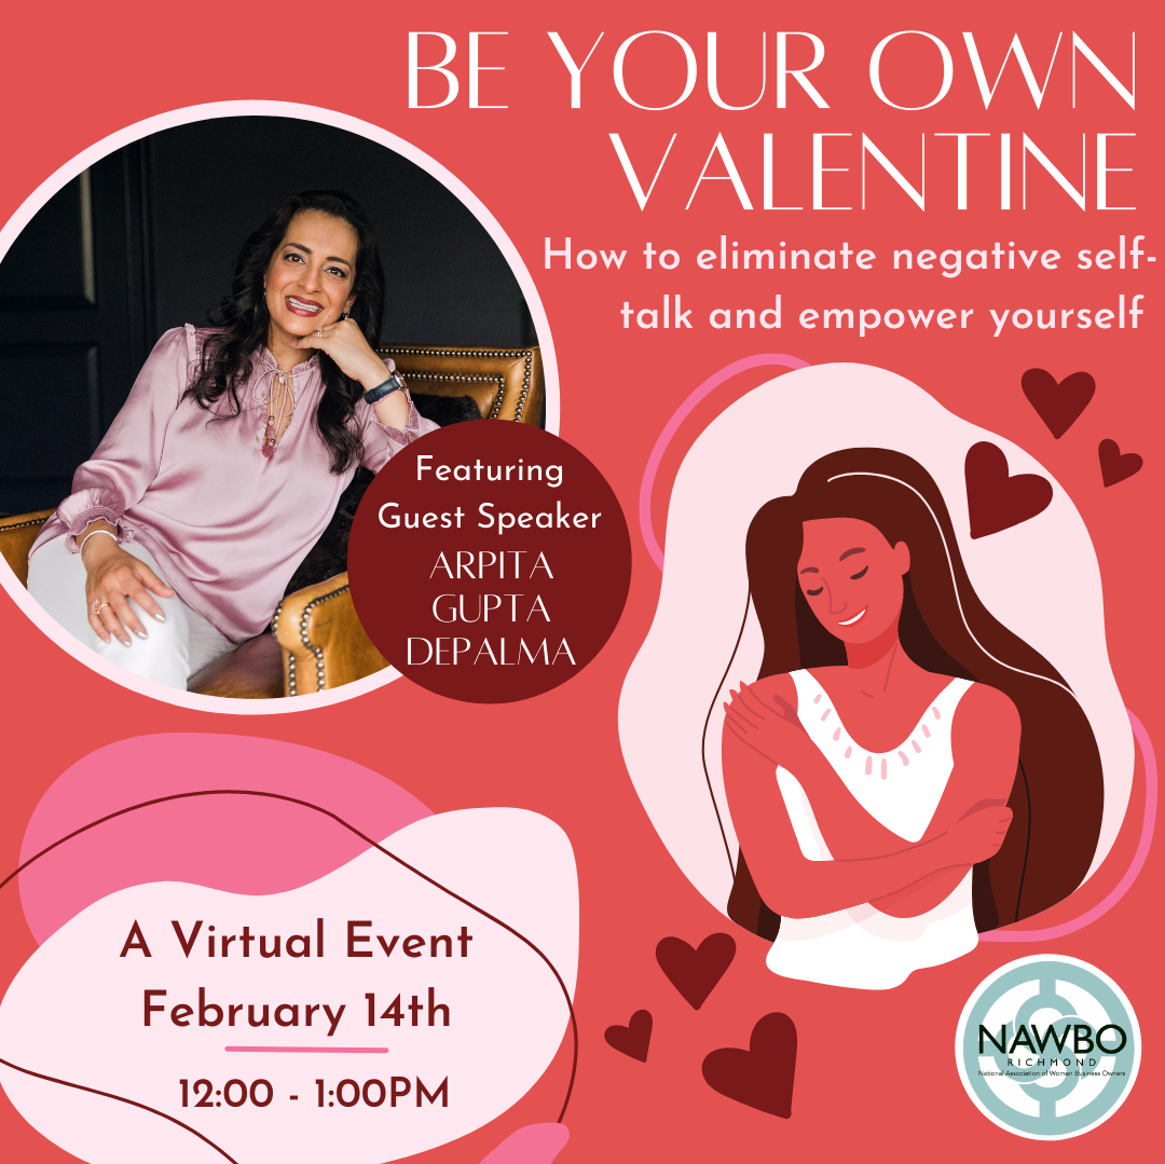 yzqpe59its-2-14-be-your-own-valentine-event